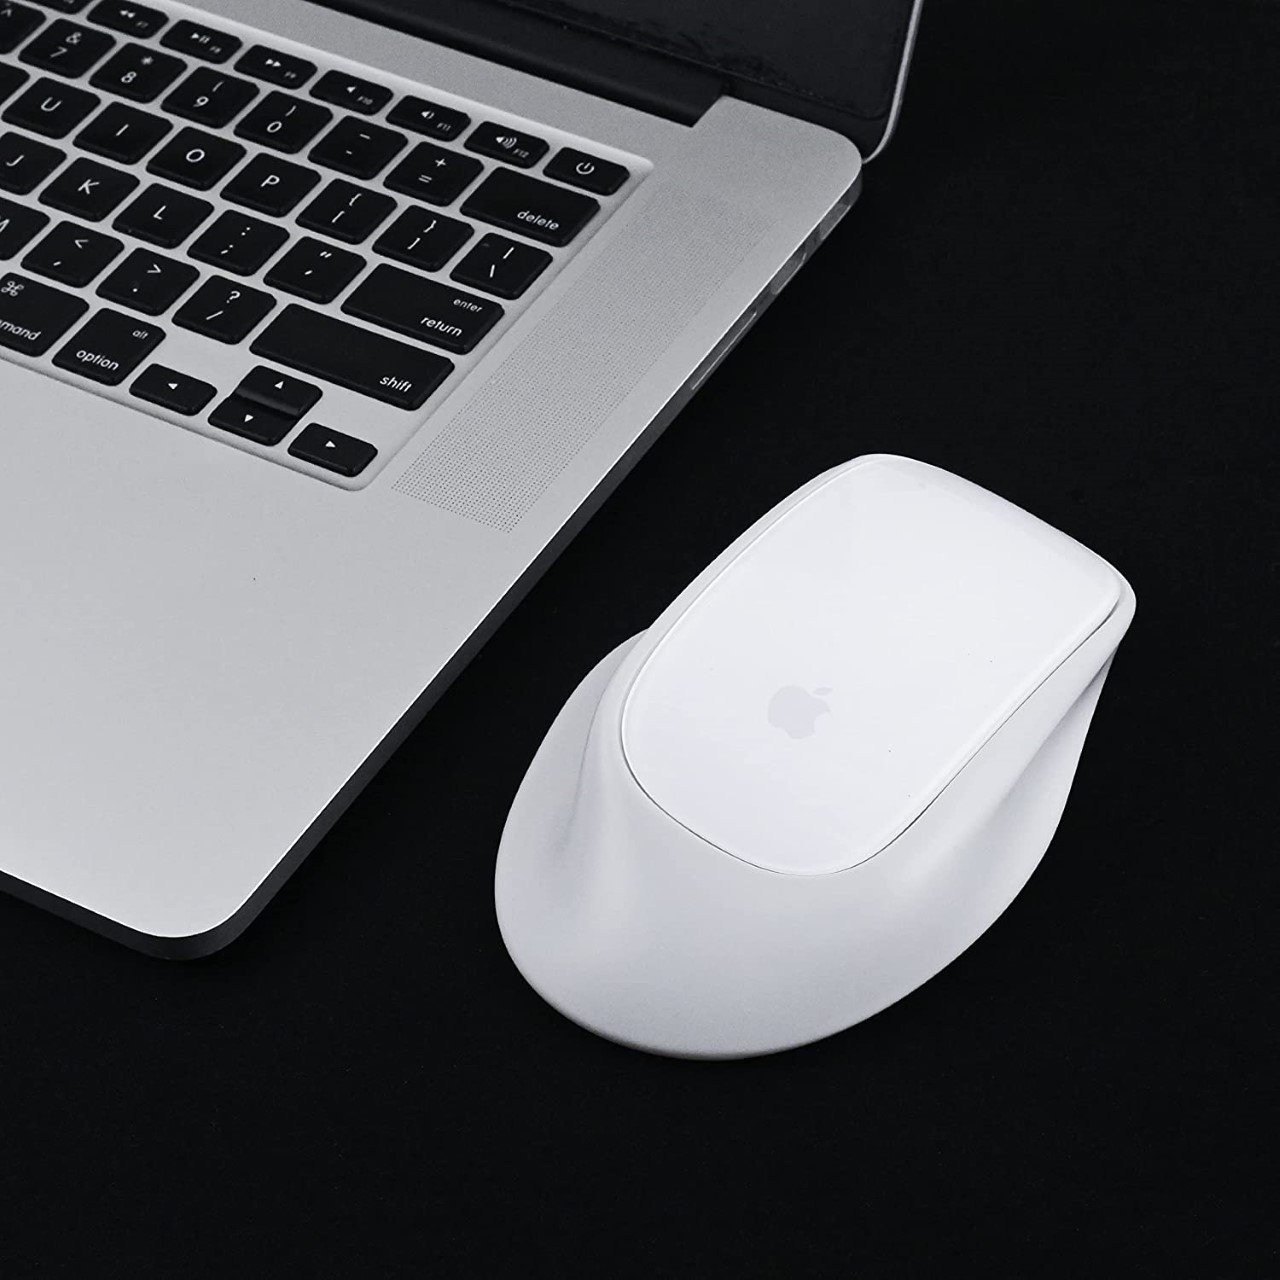 Apple’s Magic Mouse gets the absolute perfect upgrade with this